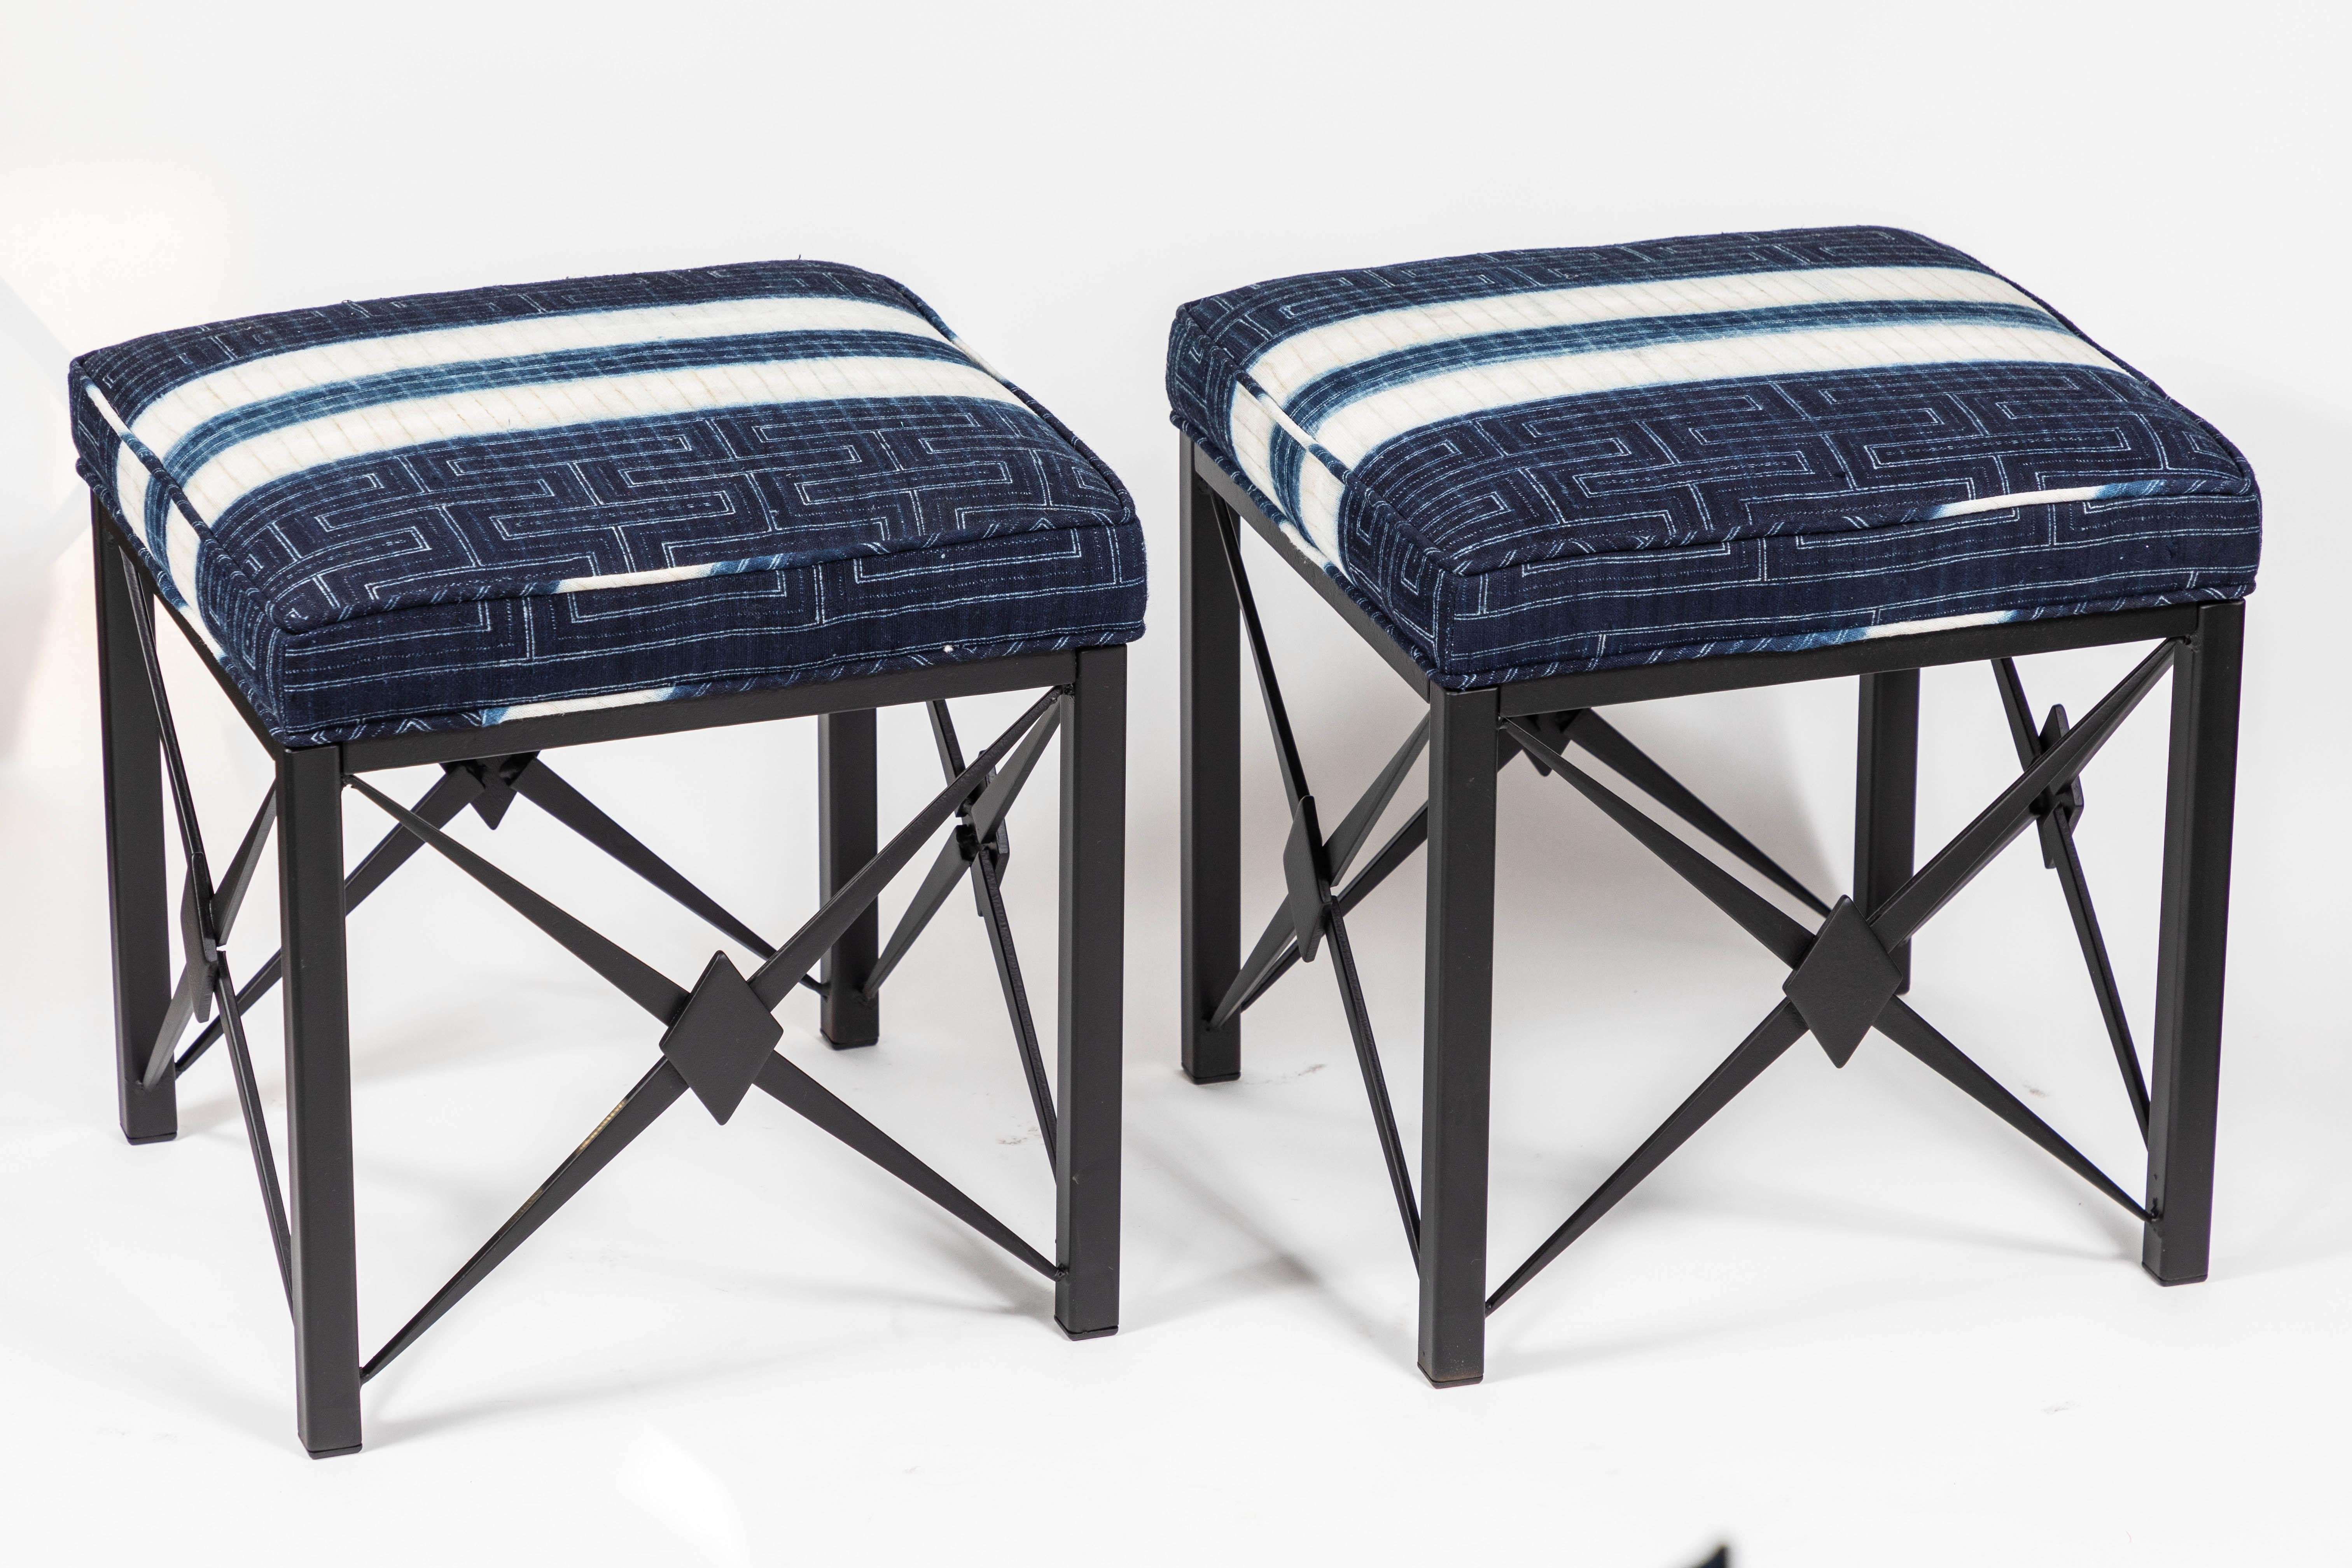 Pair of vintage iron footstools newly upholstered cushions in hand dyed blue and white cotton with new black powder-coated finish.